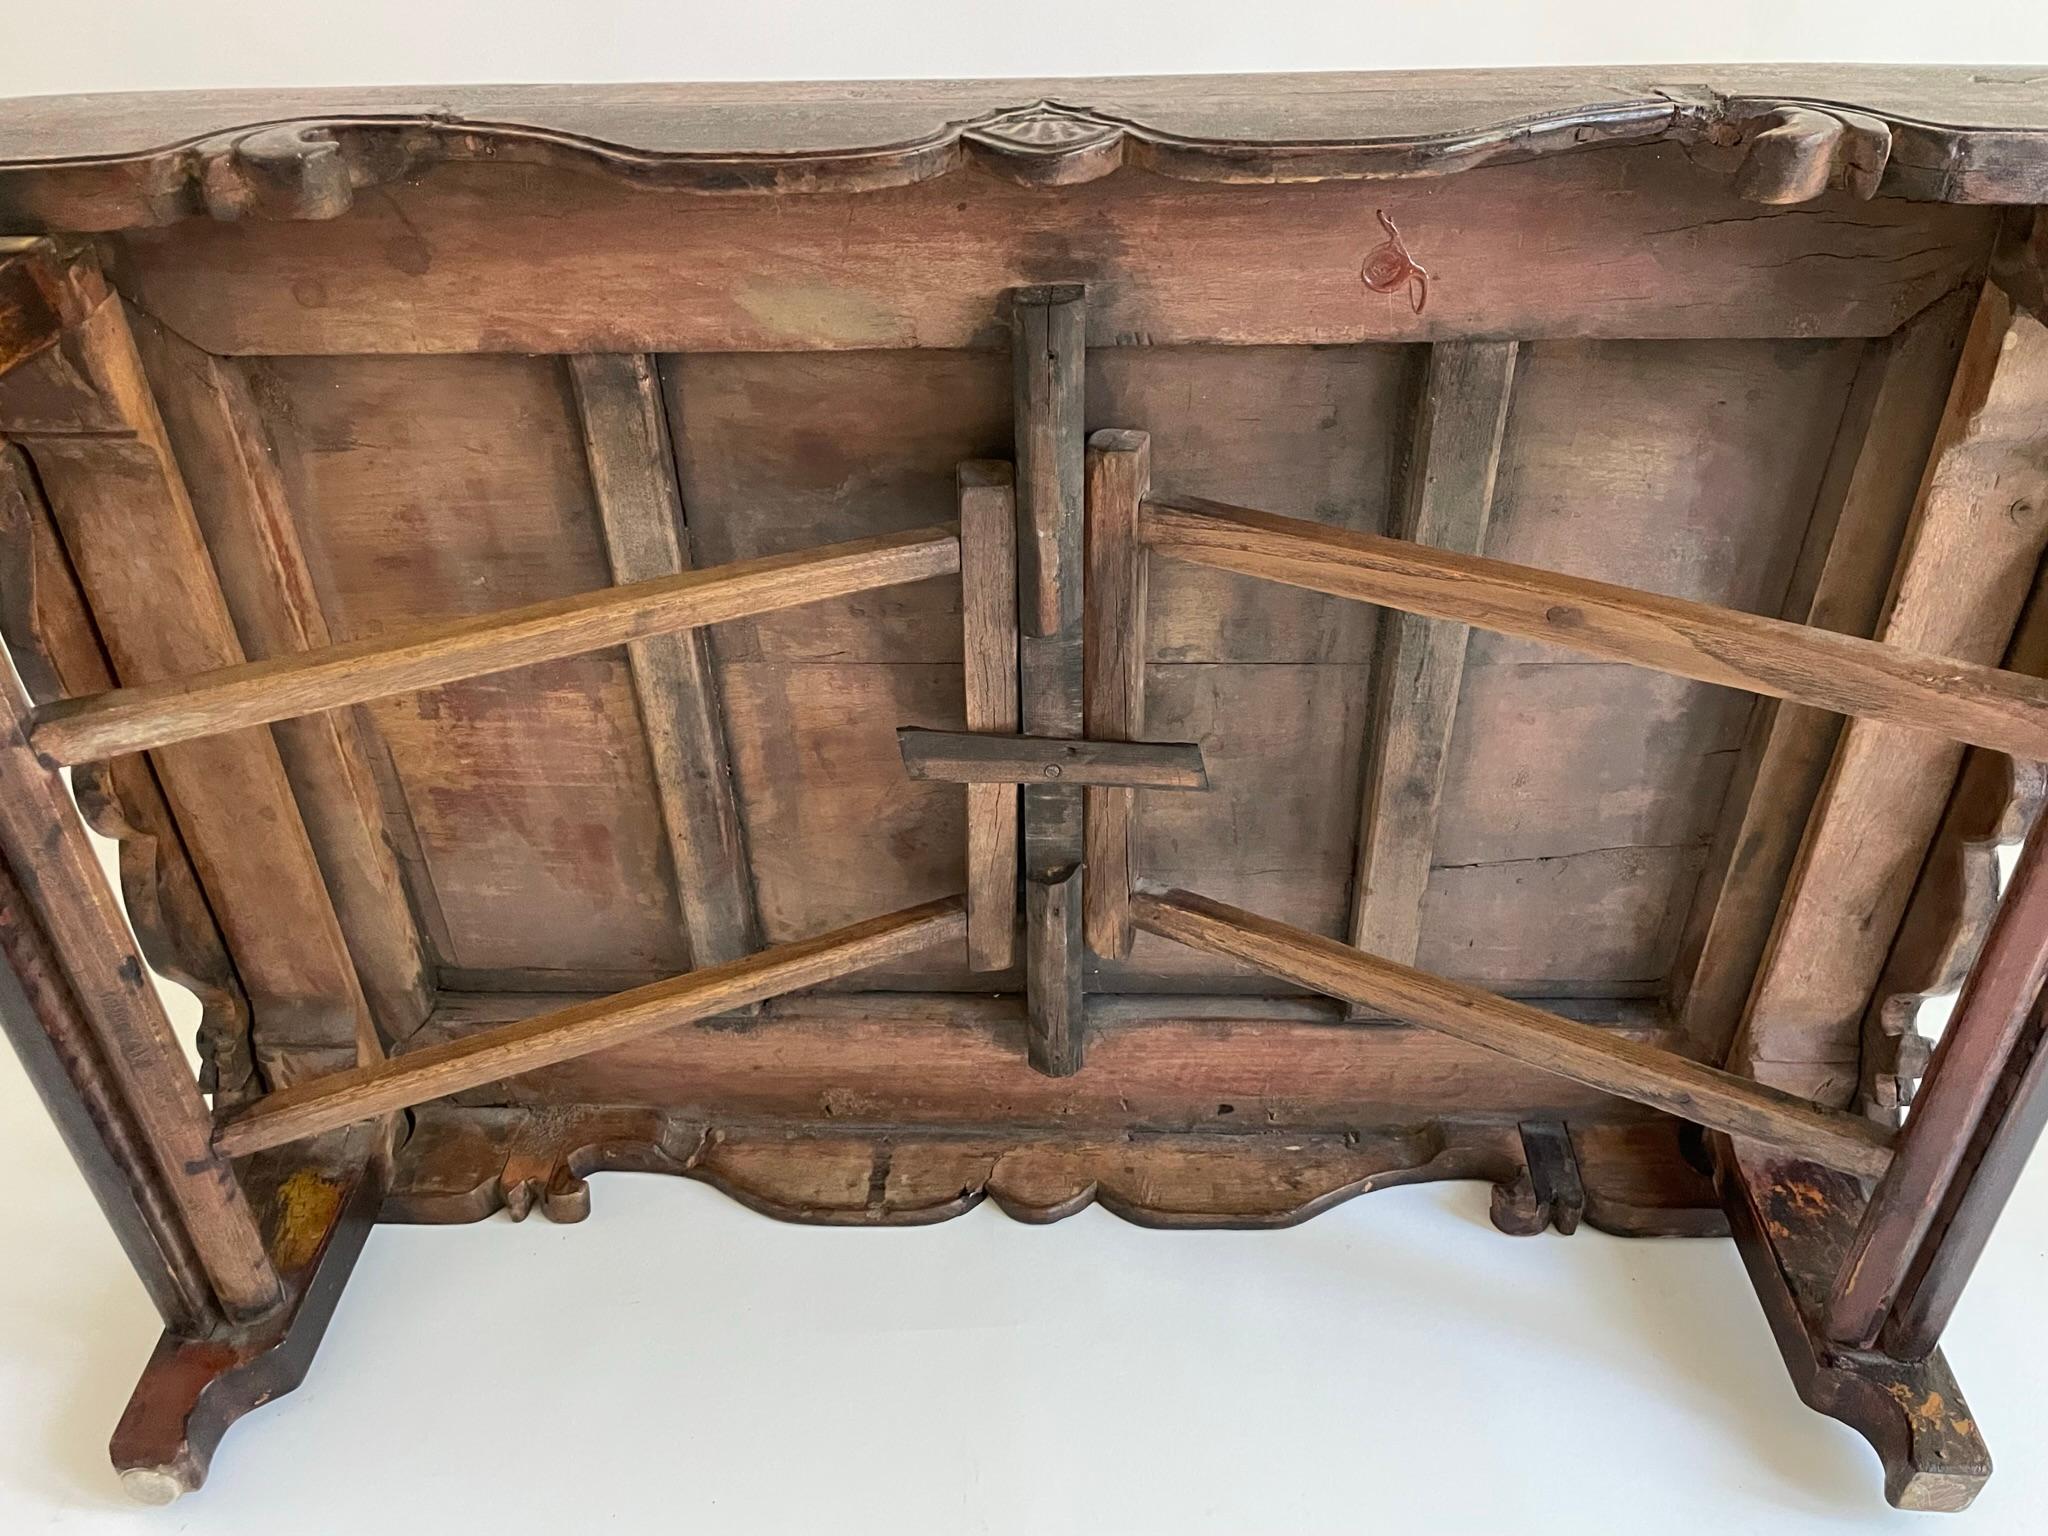 Rare 19th Century Chinese Folding Low Table 'Kang Table' For Sale 14